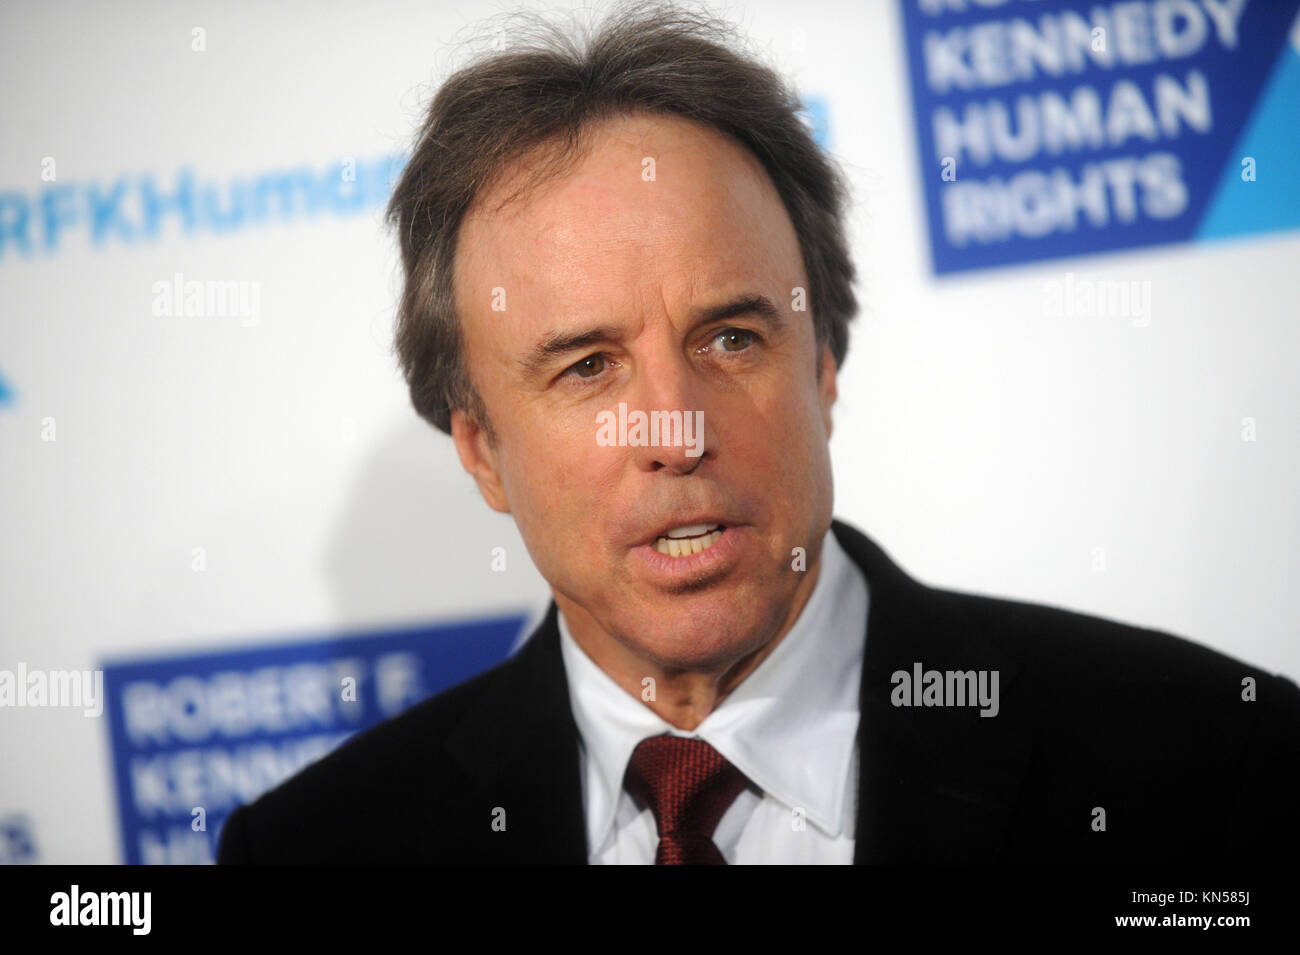 NEW YORK, NY - DECEMBER 08: Kevin Nealon attends the Robert F. Kennedy human rights 2015 Ripple of Hope awards at New York Hilton Midtown on December 8, 2015 in New York City  People:  Kevin Nealon Stock Photo